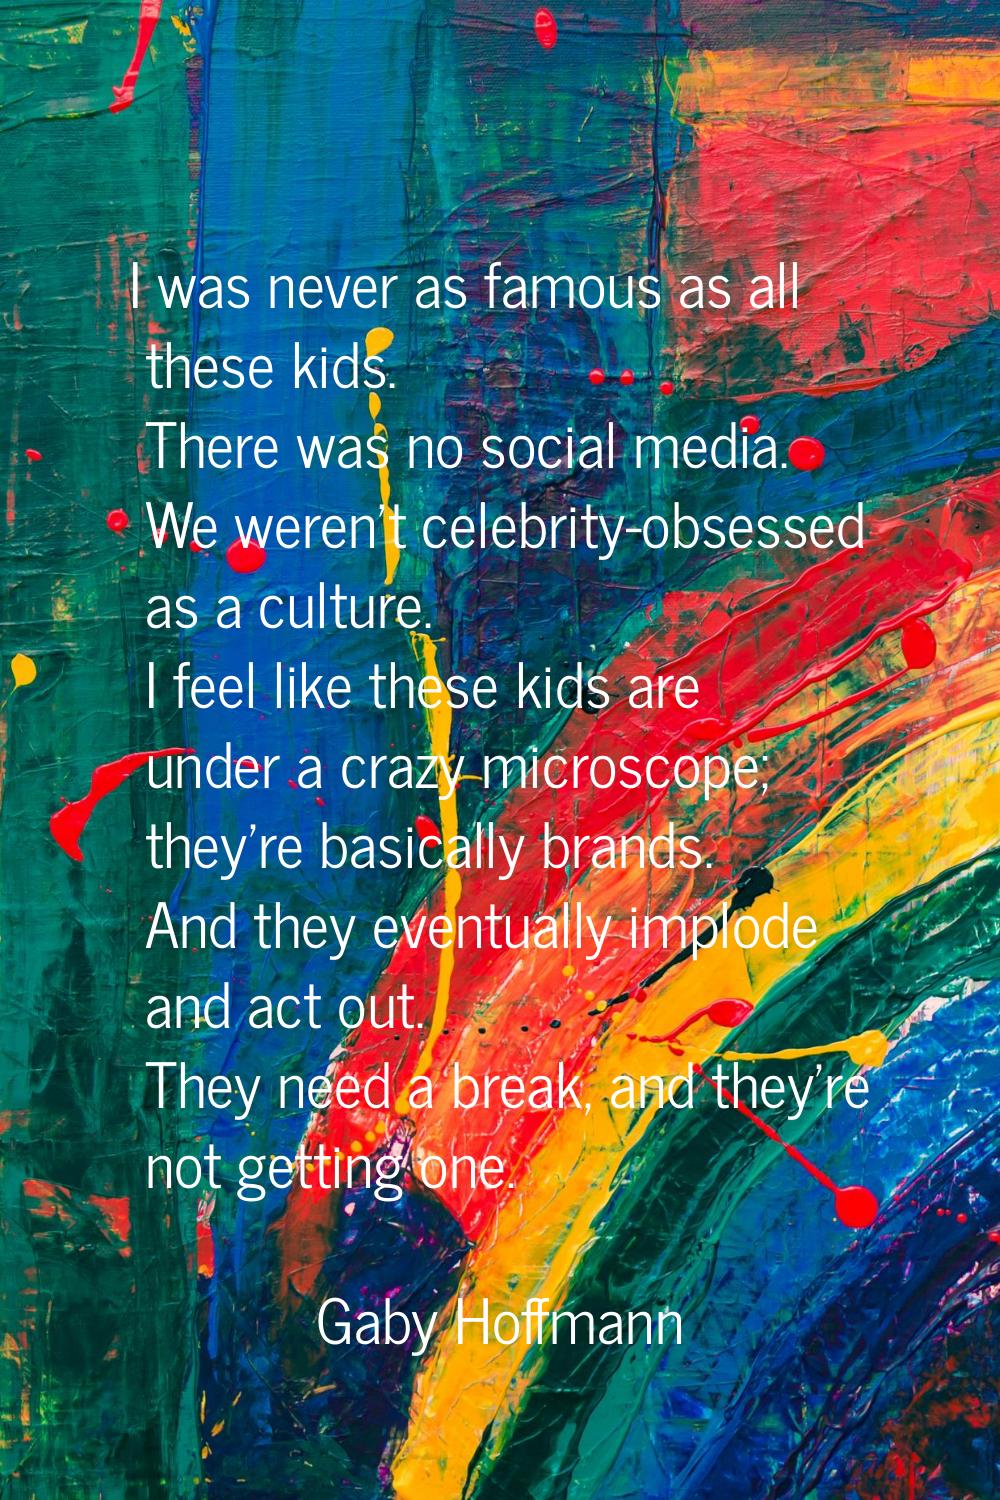 I was never as famous as all these kids. There was no social media. We weren't celebrity-obsessed a